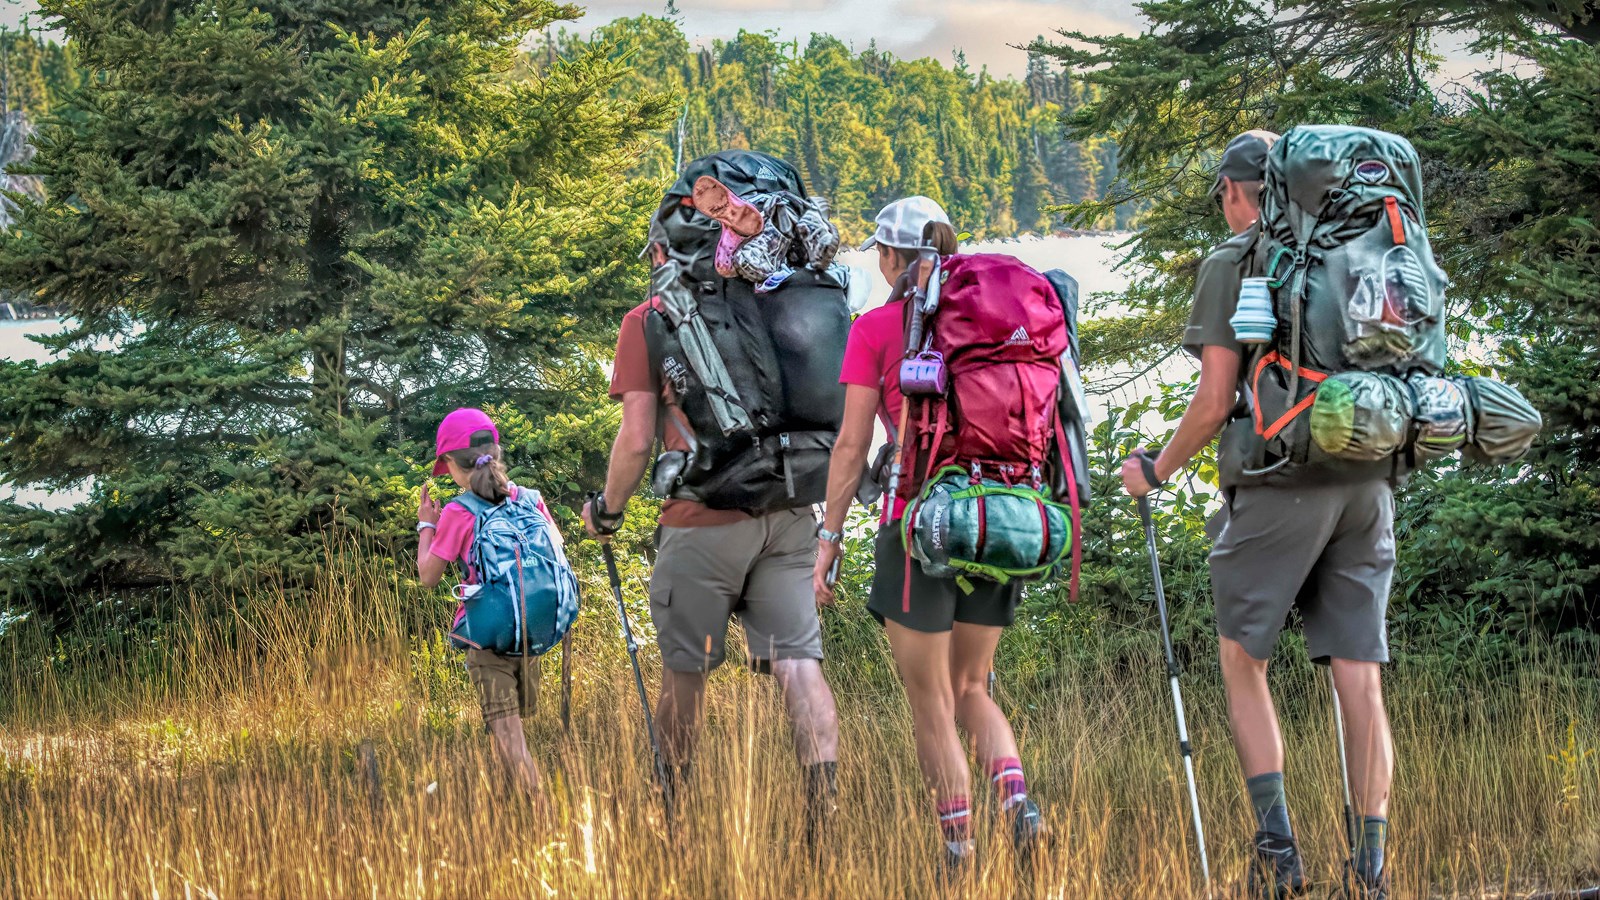 A family of two adults and two children wearing large backpacks hikes through a forest meadow.